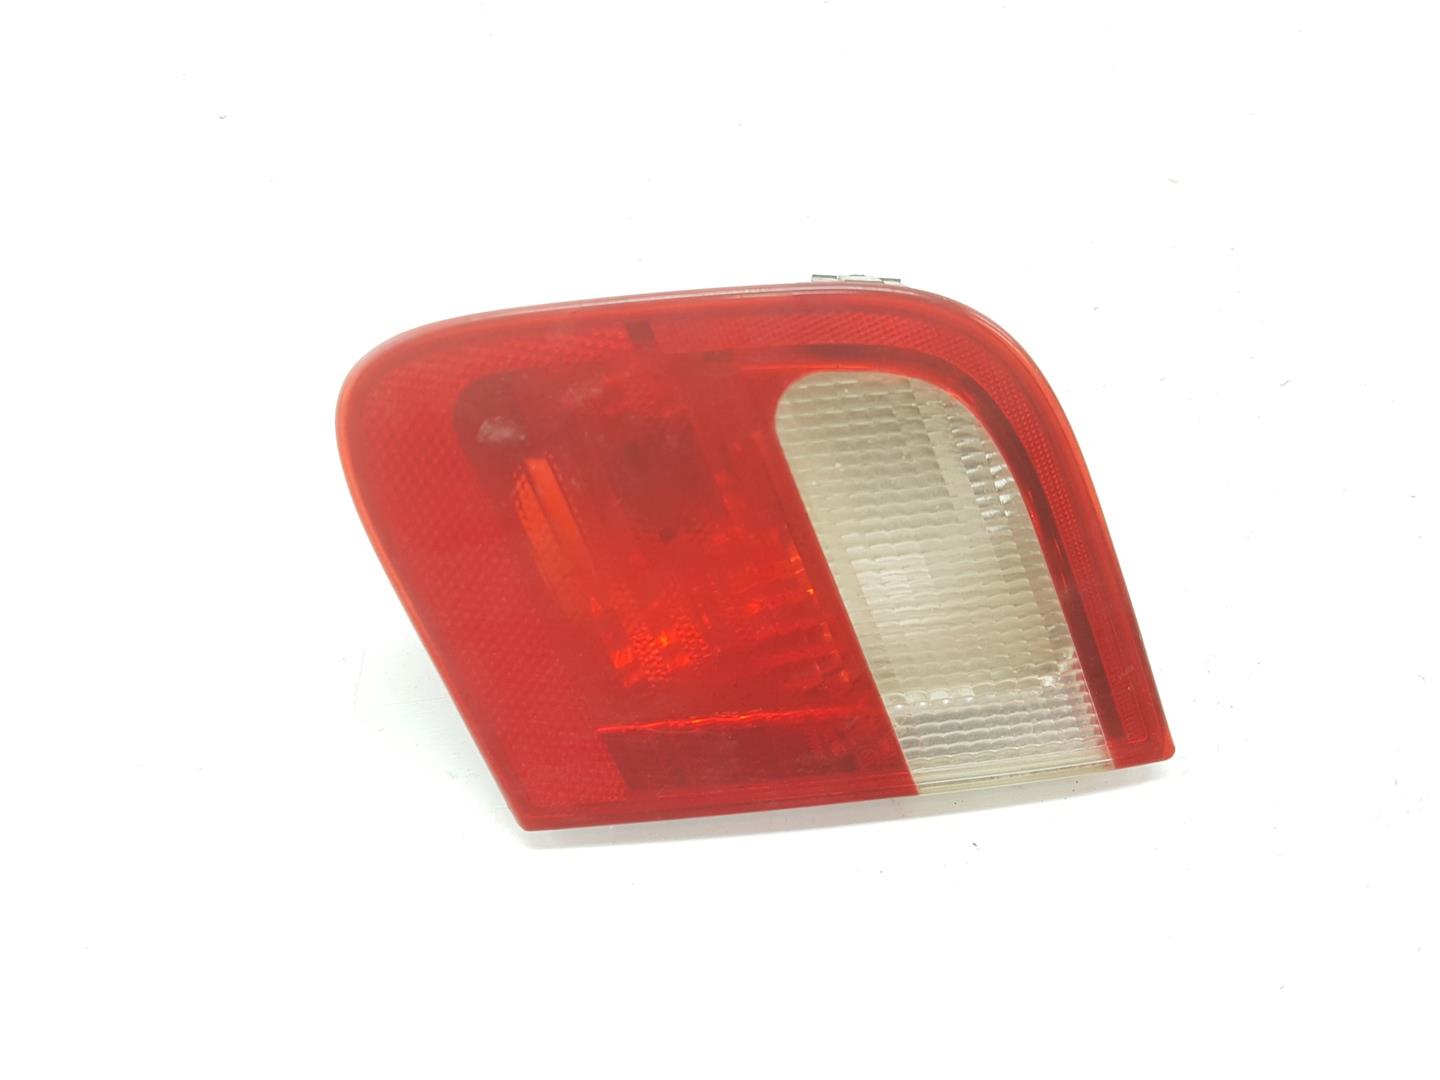 BMW 3 Series E46 (1997-2006) Rear Right Taillight Lamp 63218364924, 63218364924 24156907